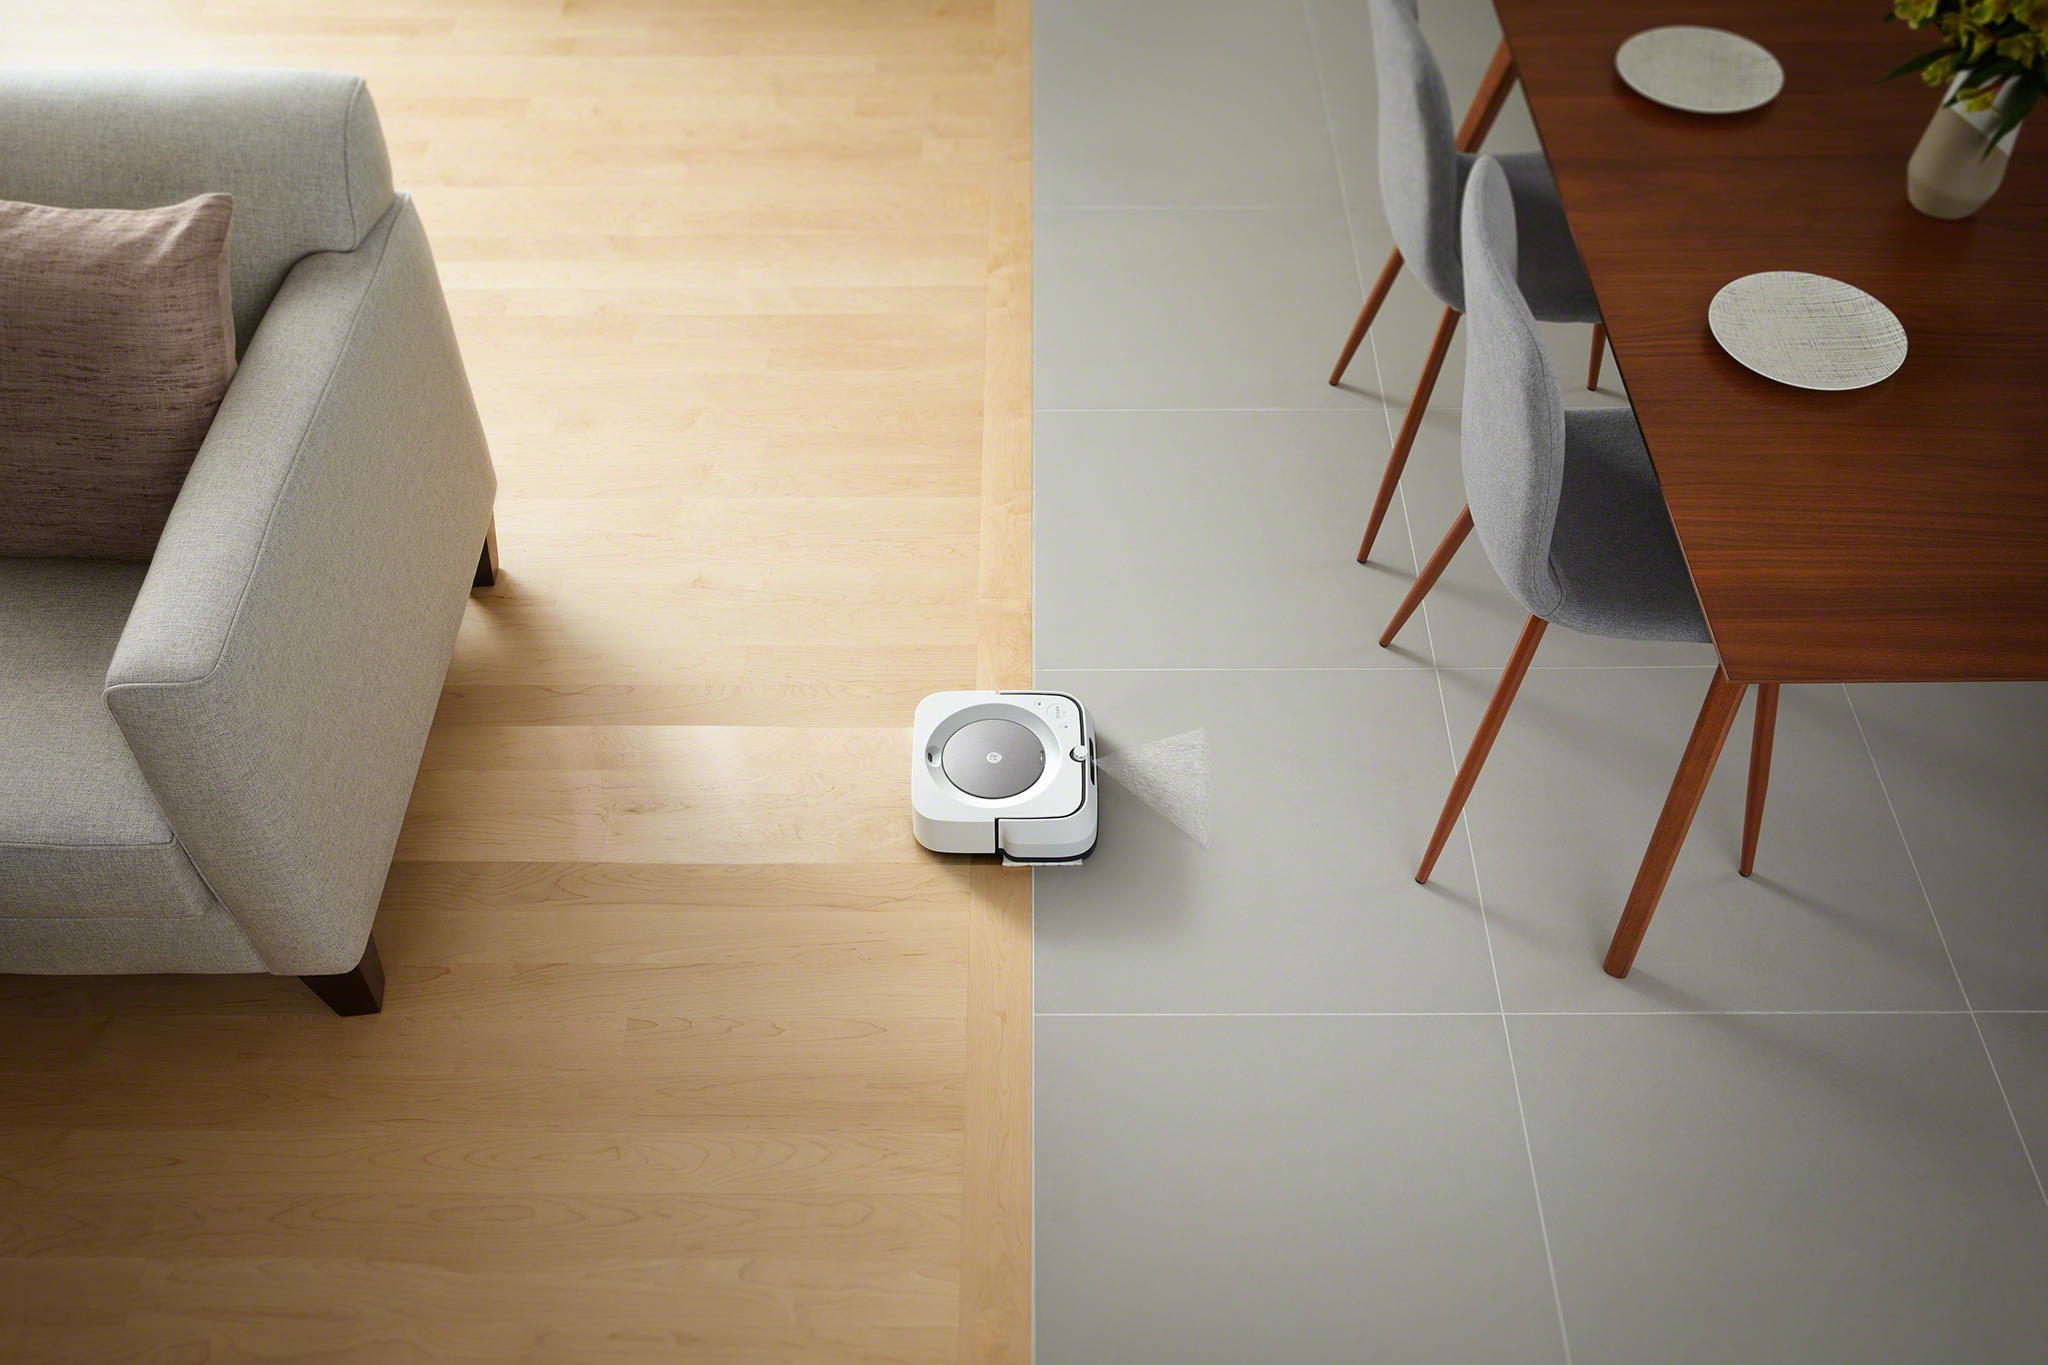 The Braava jet® m6 robot mop tackles multiple rooms and large spaces with advanced navigation and mapping capabilities.